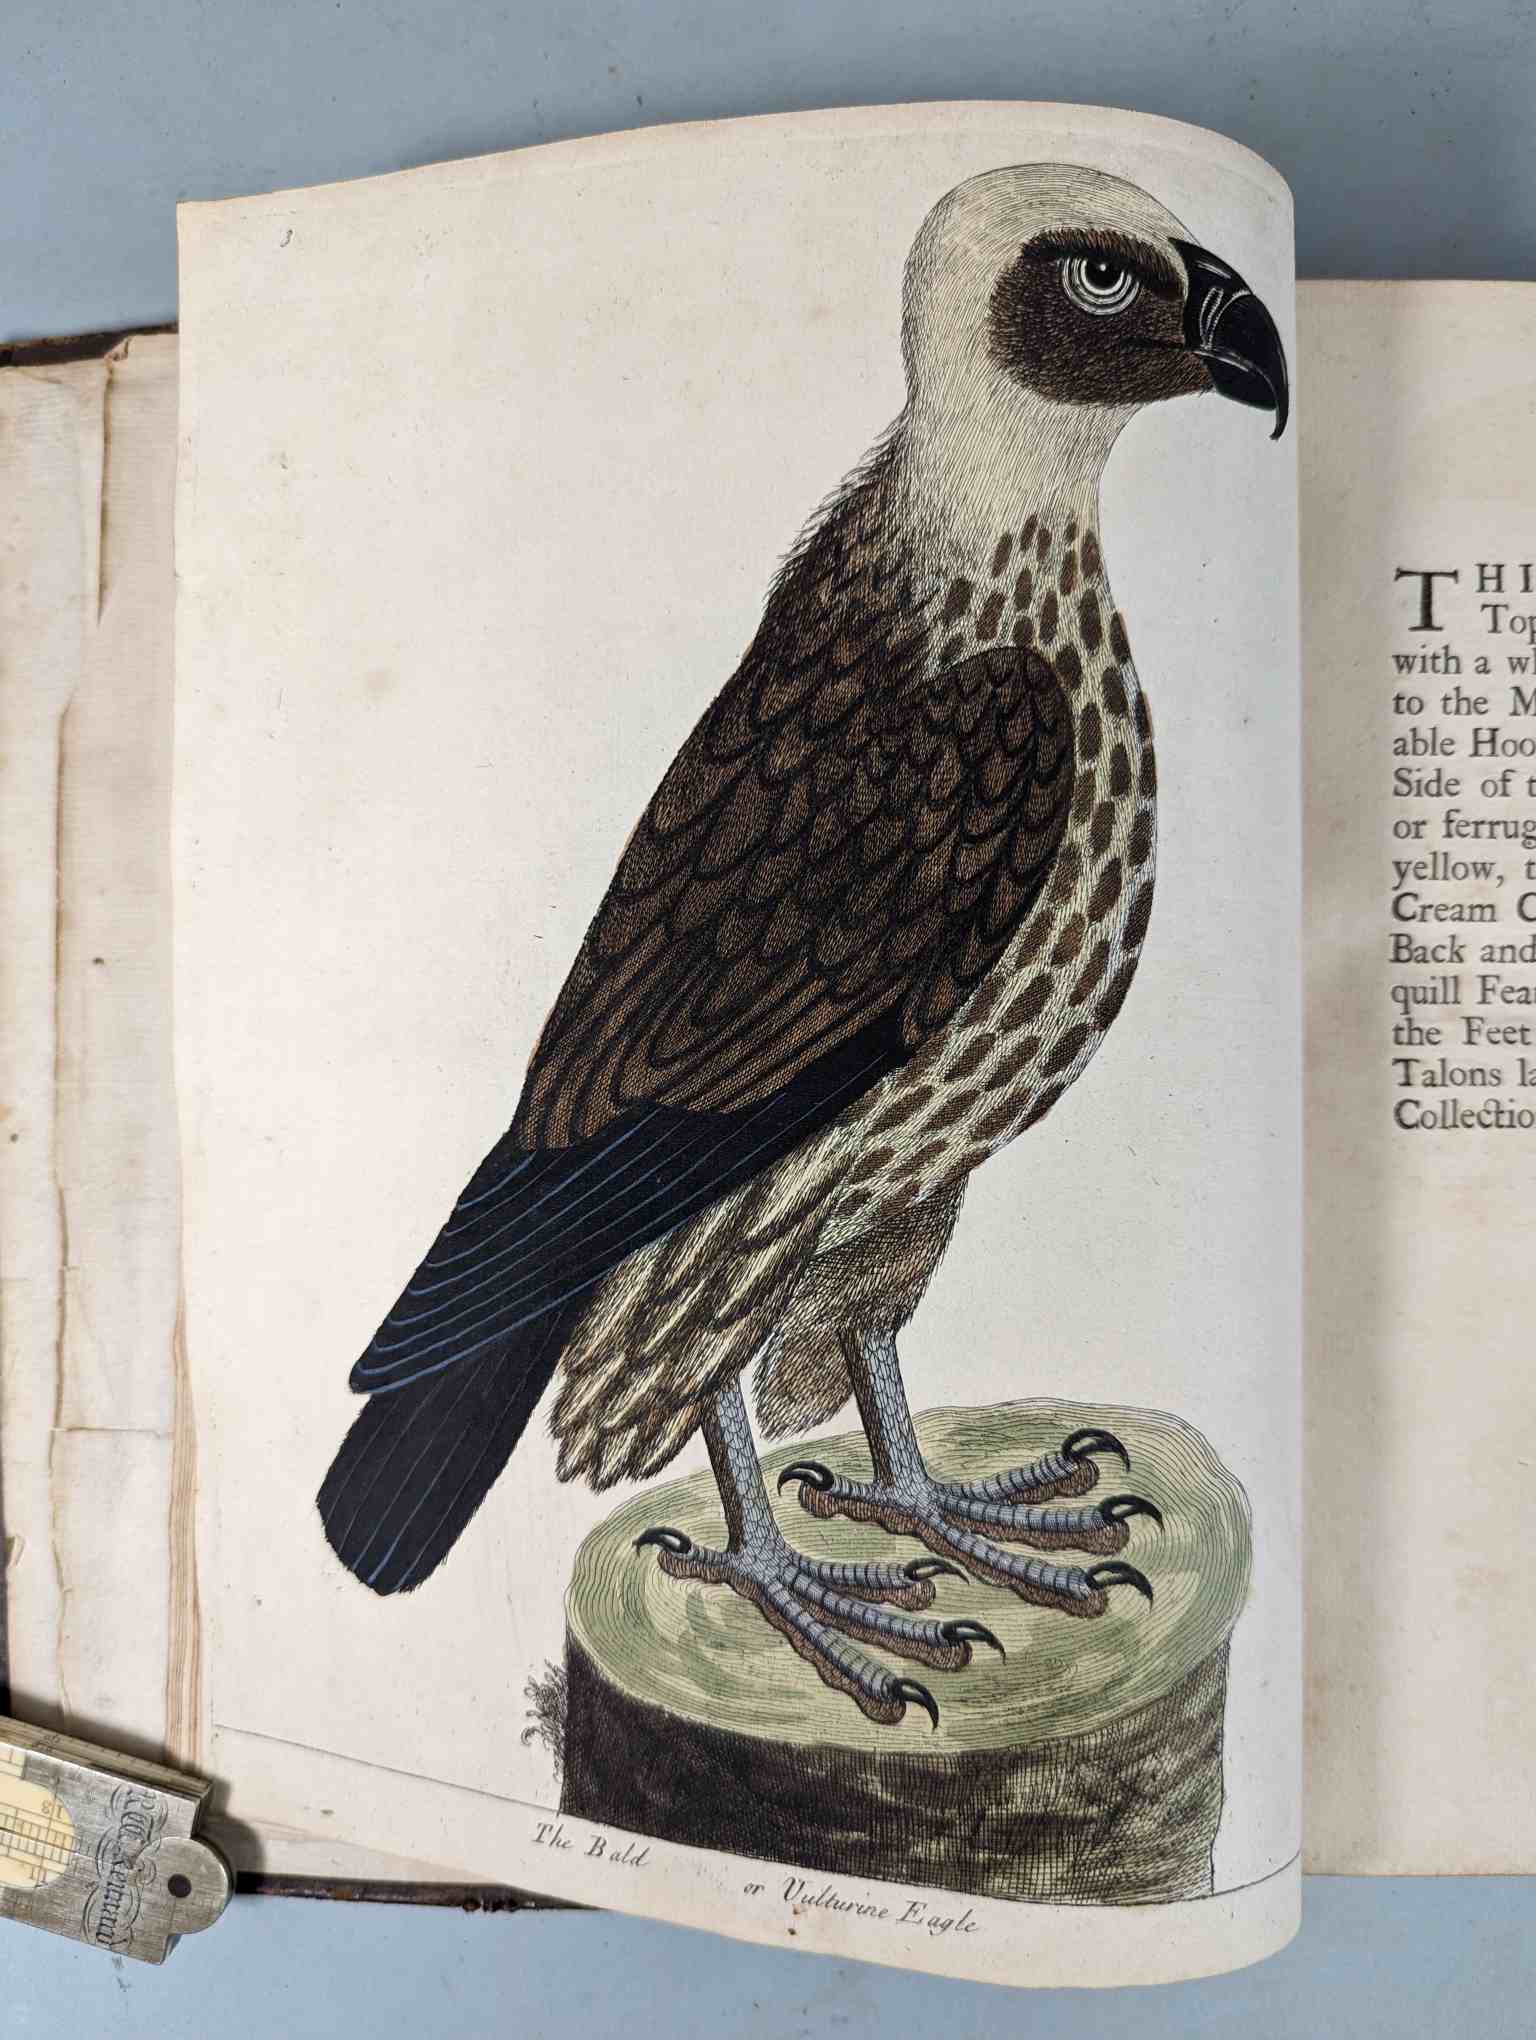 ALBIN, Eleazar. A Natural History of Birds, to which are added, Notes and Observations by W. - Image 107 of 208